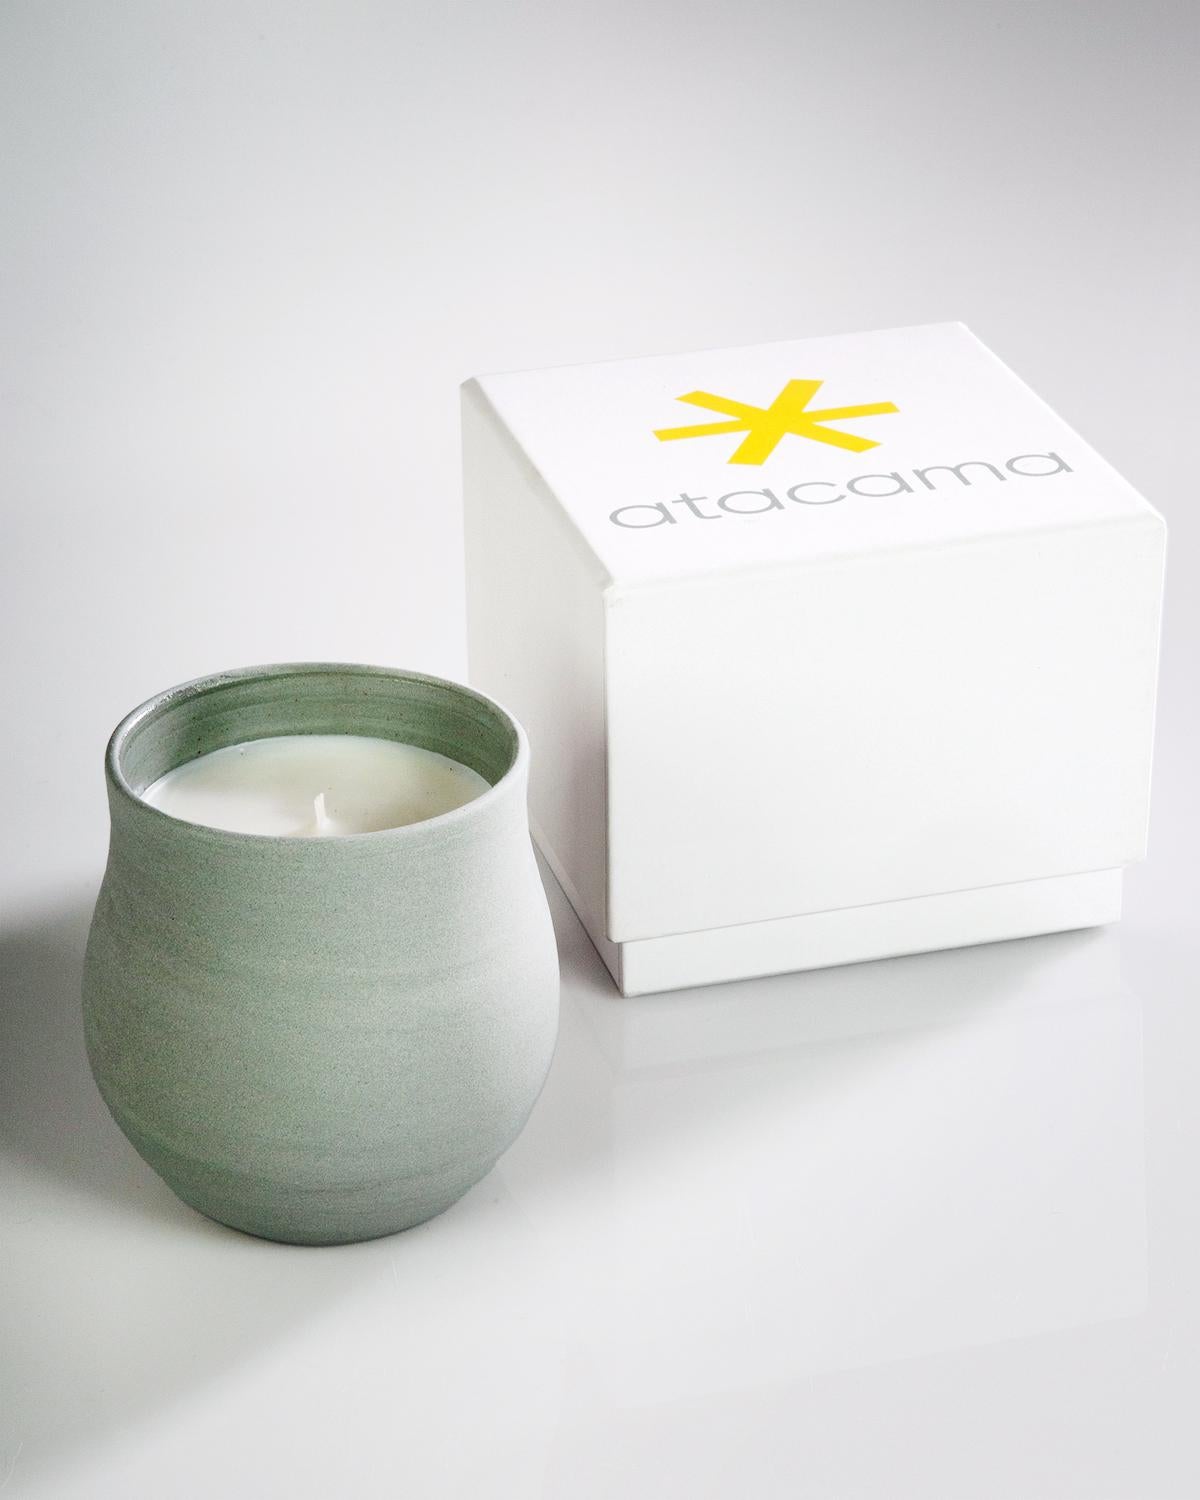 An organic modern candle to brighten your home
A bright scented candle to elevate your space. These costal handmade scented candles are perfect on your nightstand by your bed or on your coffee table in the living room. Their organic modern handmade